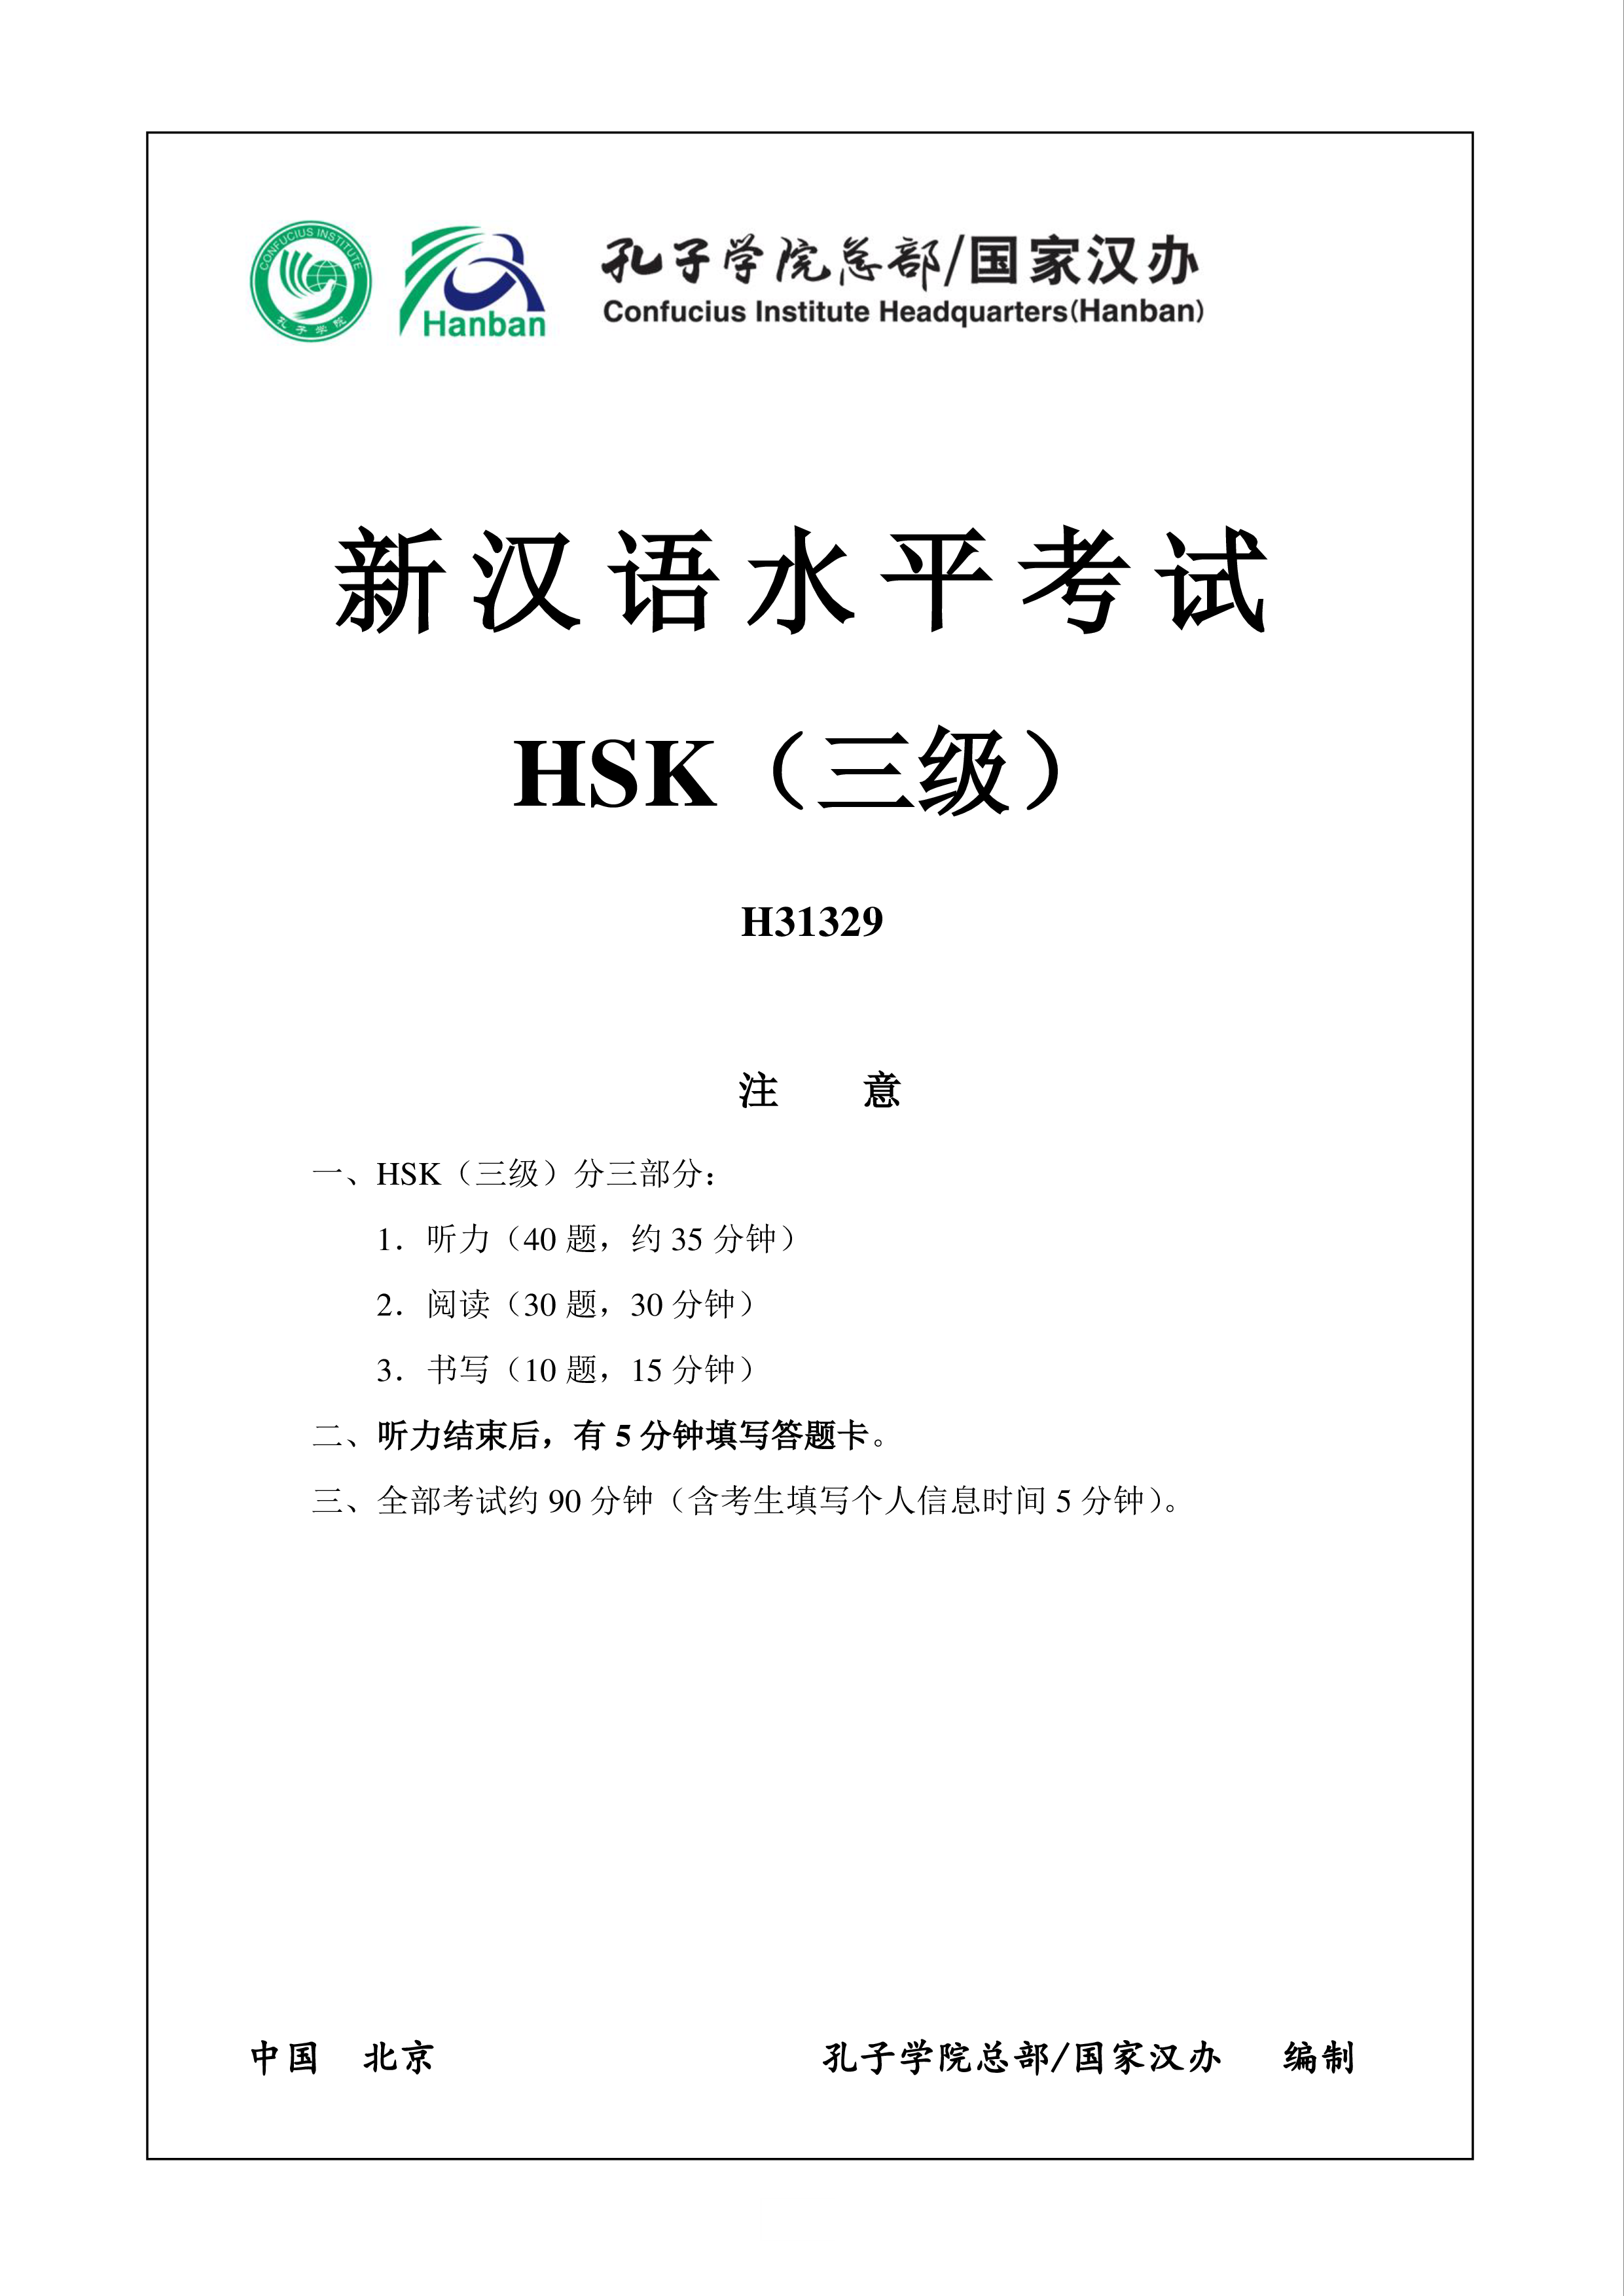 hsk3 chinese exam including answers # h31329 voorbeeld afbeelding 